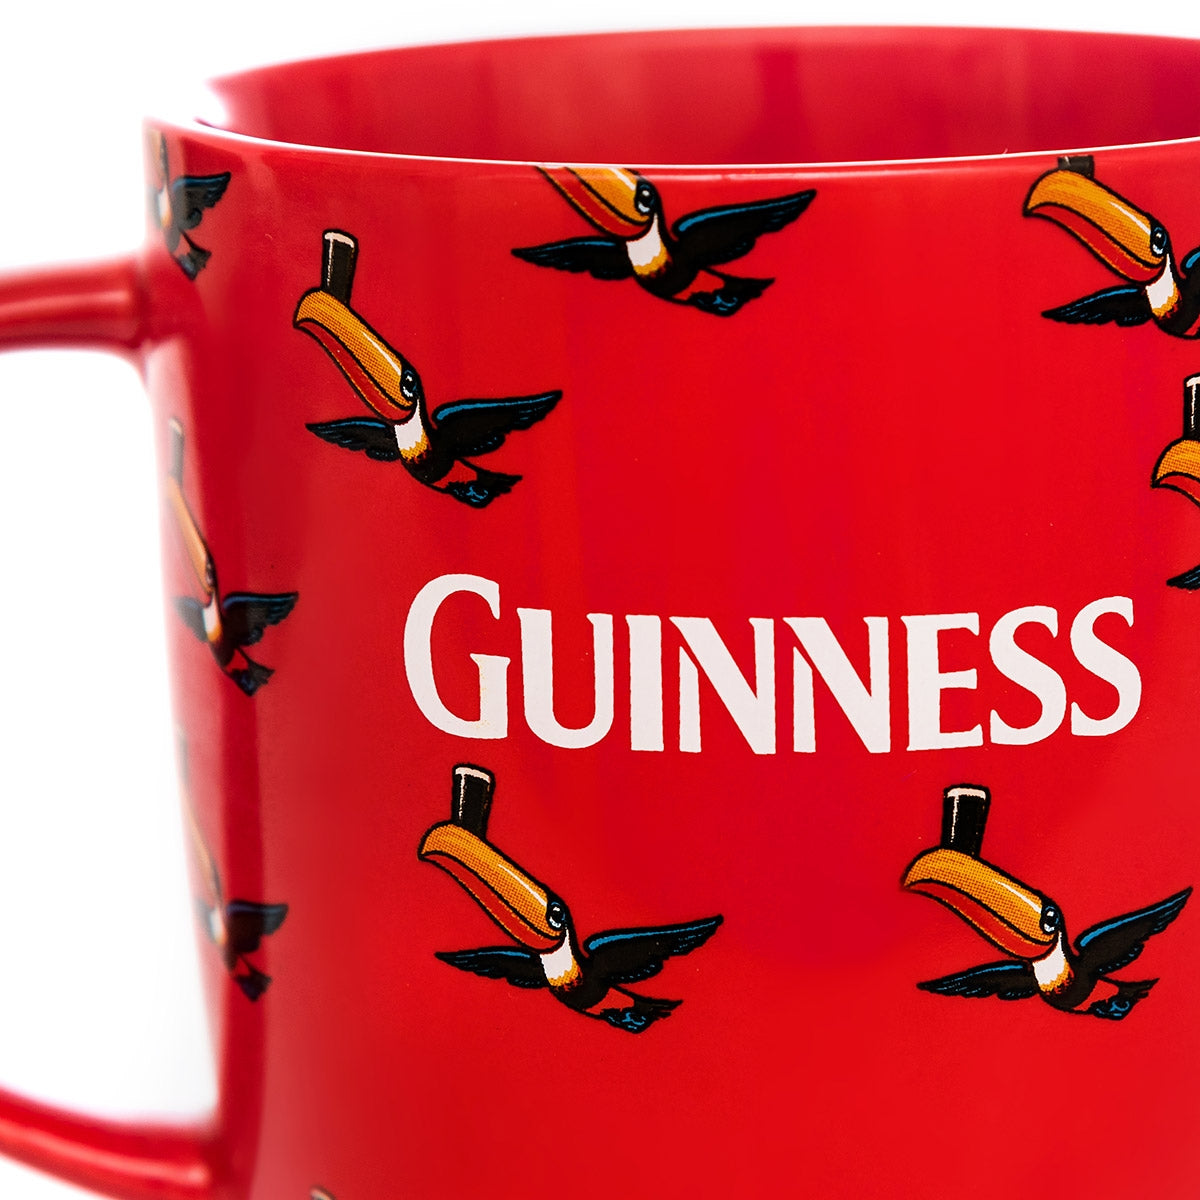 Guinness Red Mug with Multiple Flying Toucans